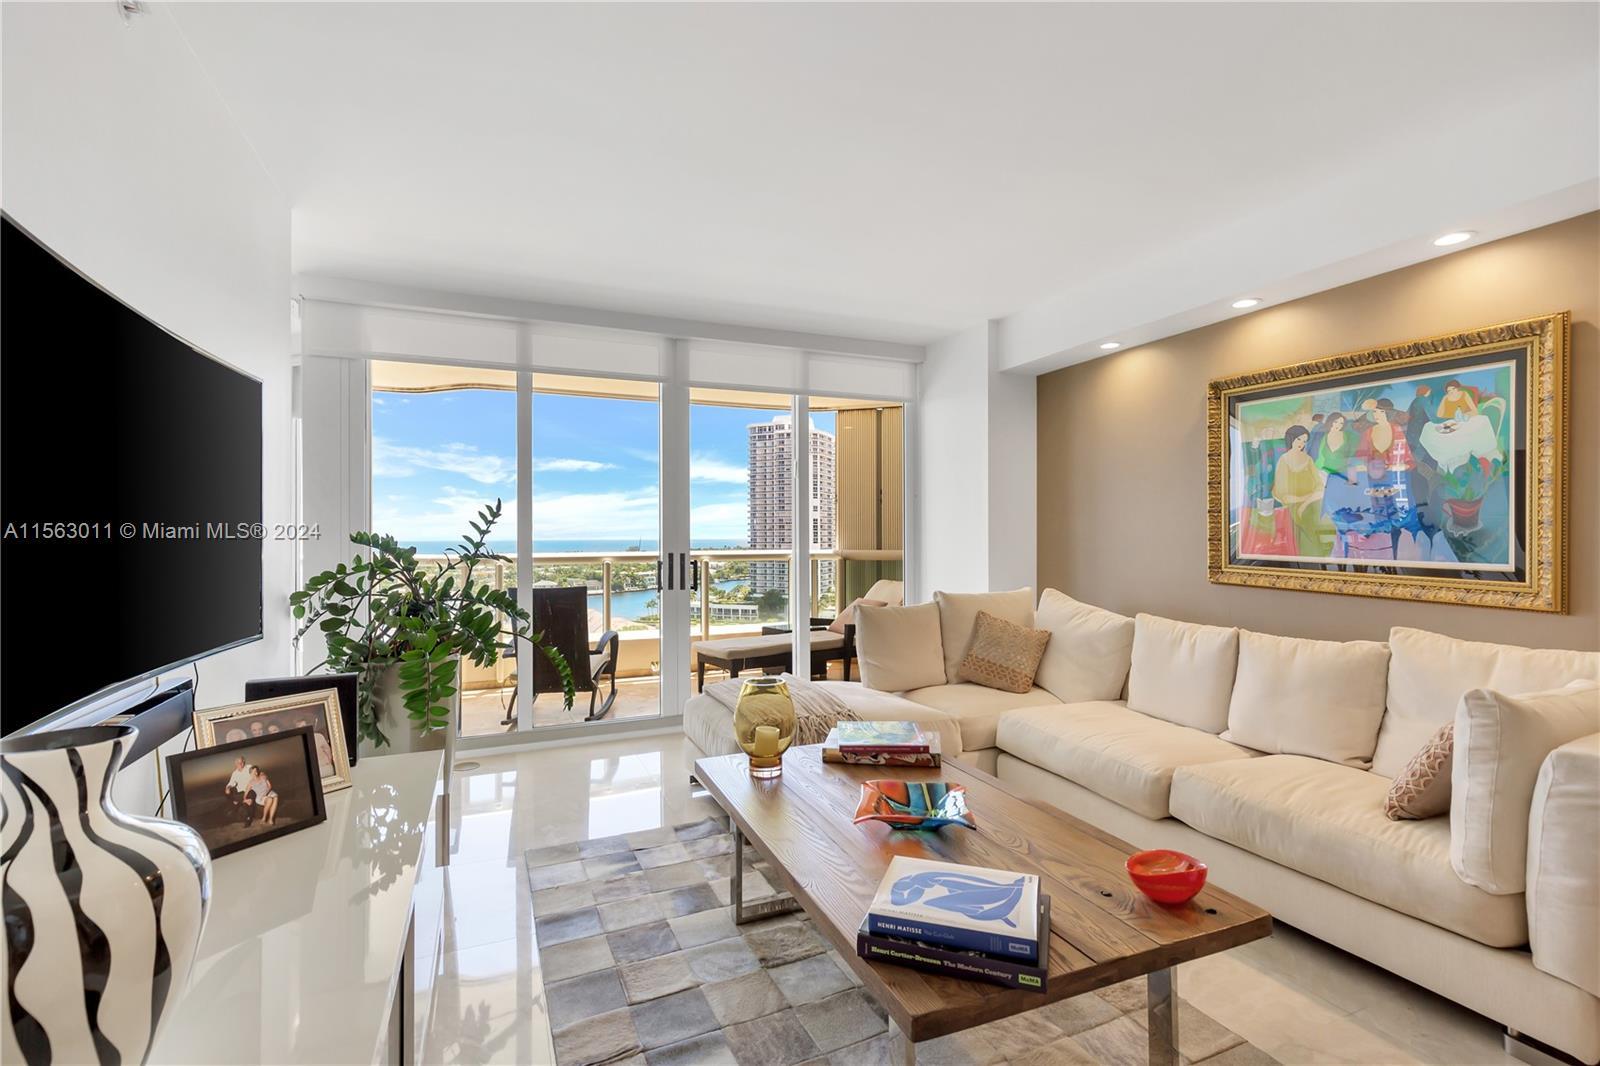 TURN-KEY UPDATED 2 BEDROOM + DEN UNIT WITH A MAGNIFICENT INTRACOASTAL AND OCEAN VIEWS FROM THE ENTIR